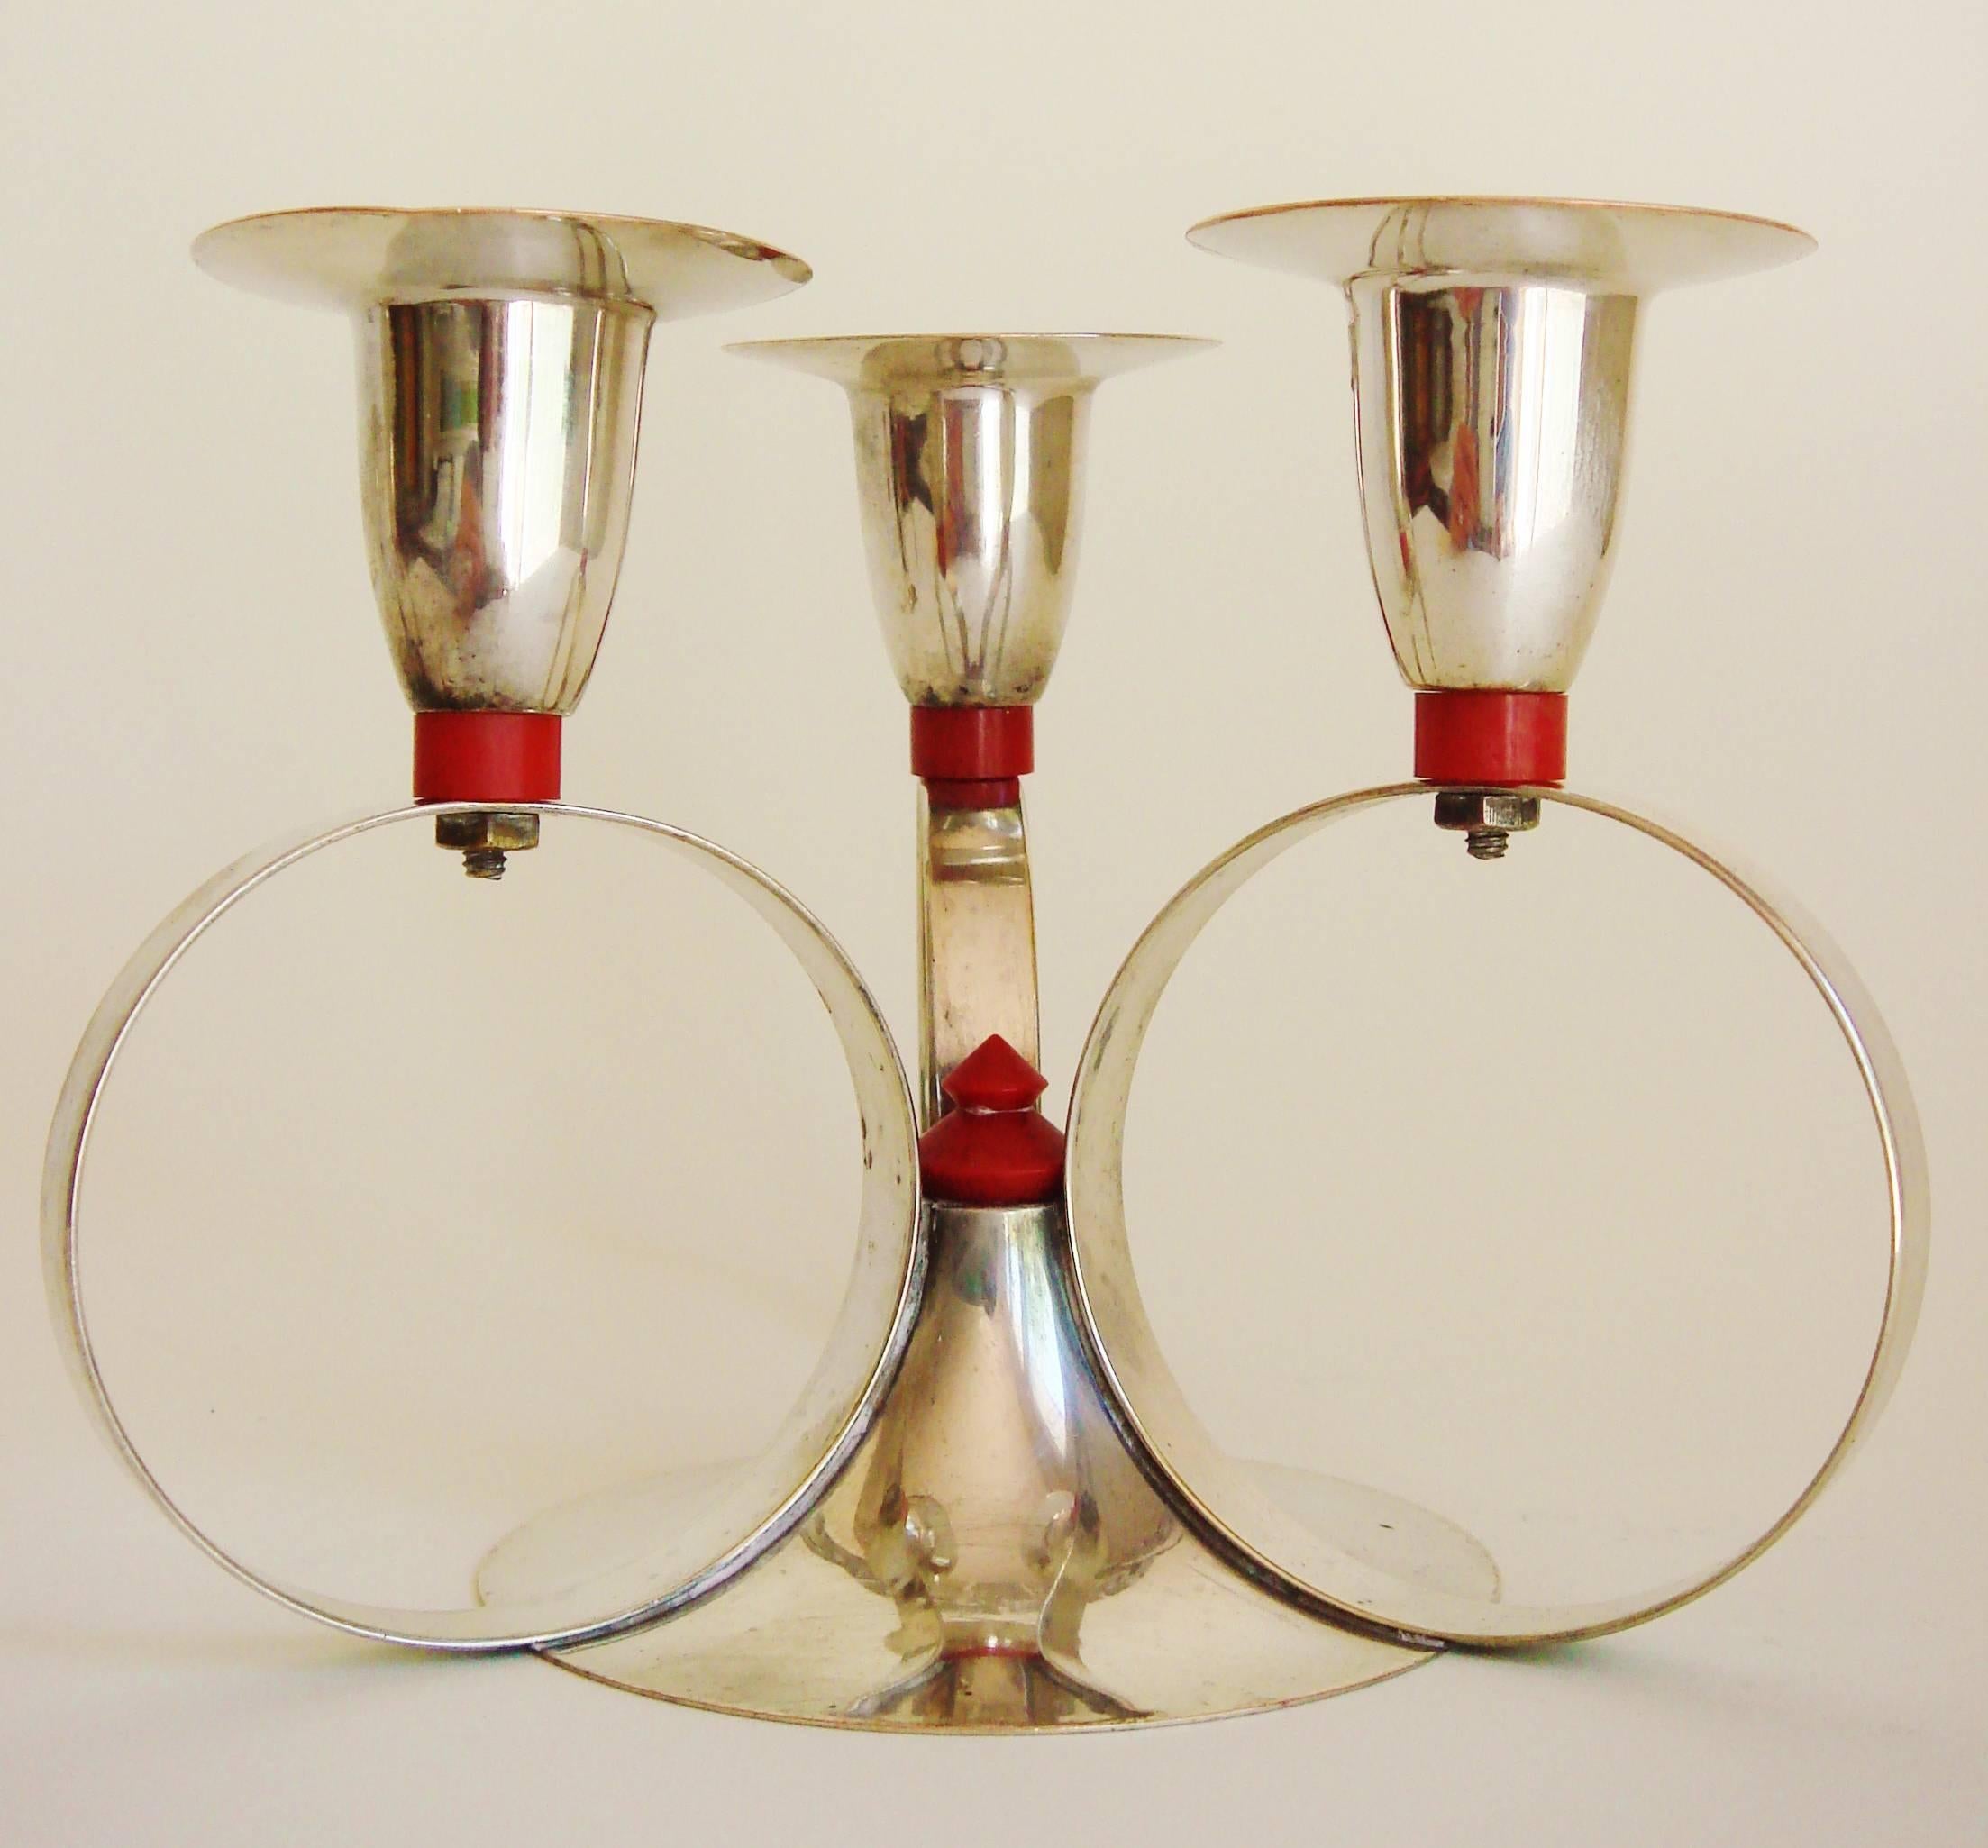 This stylish pair of American Art Deco silver plated copper, triple hooped candle holders feature red Bakelite accents. They are unmarked but are obviously a high quality pair from an excellent maker. The silver plating is near perfect with no